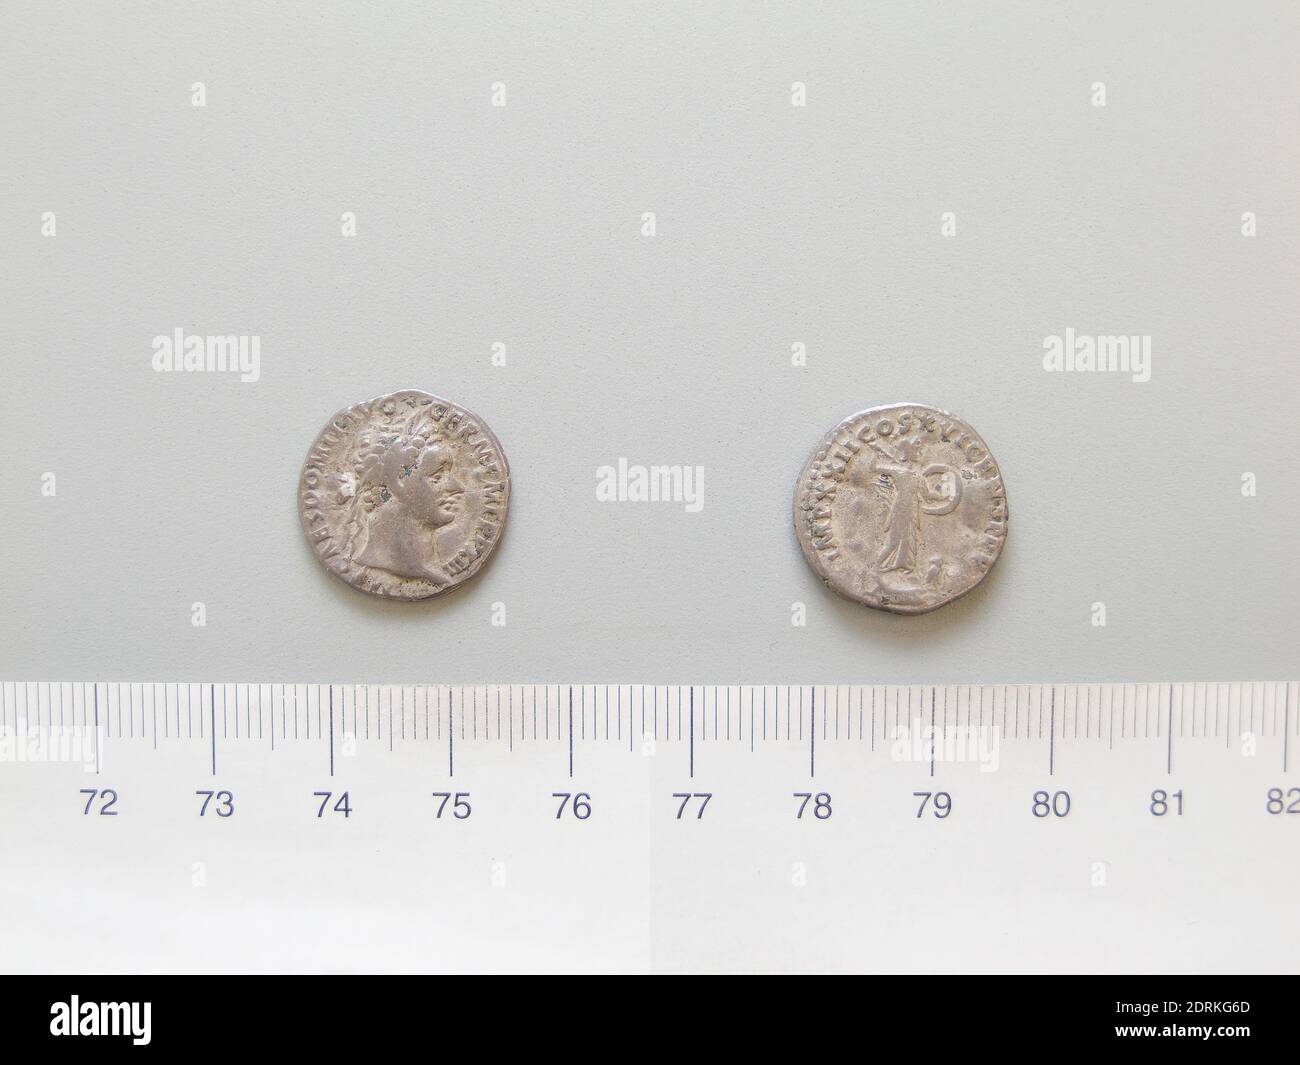 Ruler: Domitian, Emperor of Rome, A.D. 51–96, ruled 81–96, Mint: Rome, Denarius of Domitian, Emperor of Rome from Rome, 93–94, Silver, 3.15 g, 6:00, 17.9 mm, Made in Rome, Italy, Roman, 1st century A.D., Numismatics Stock Photo